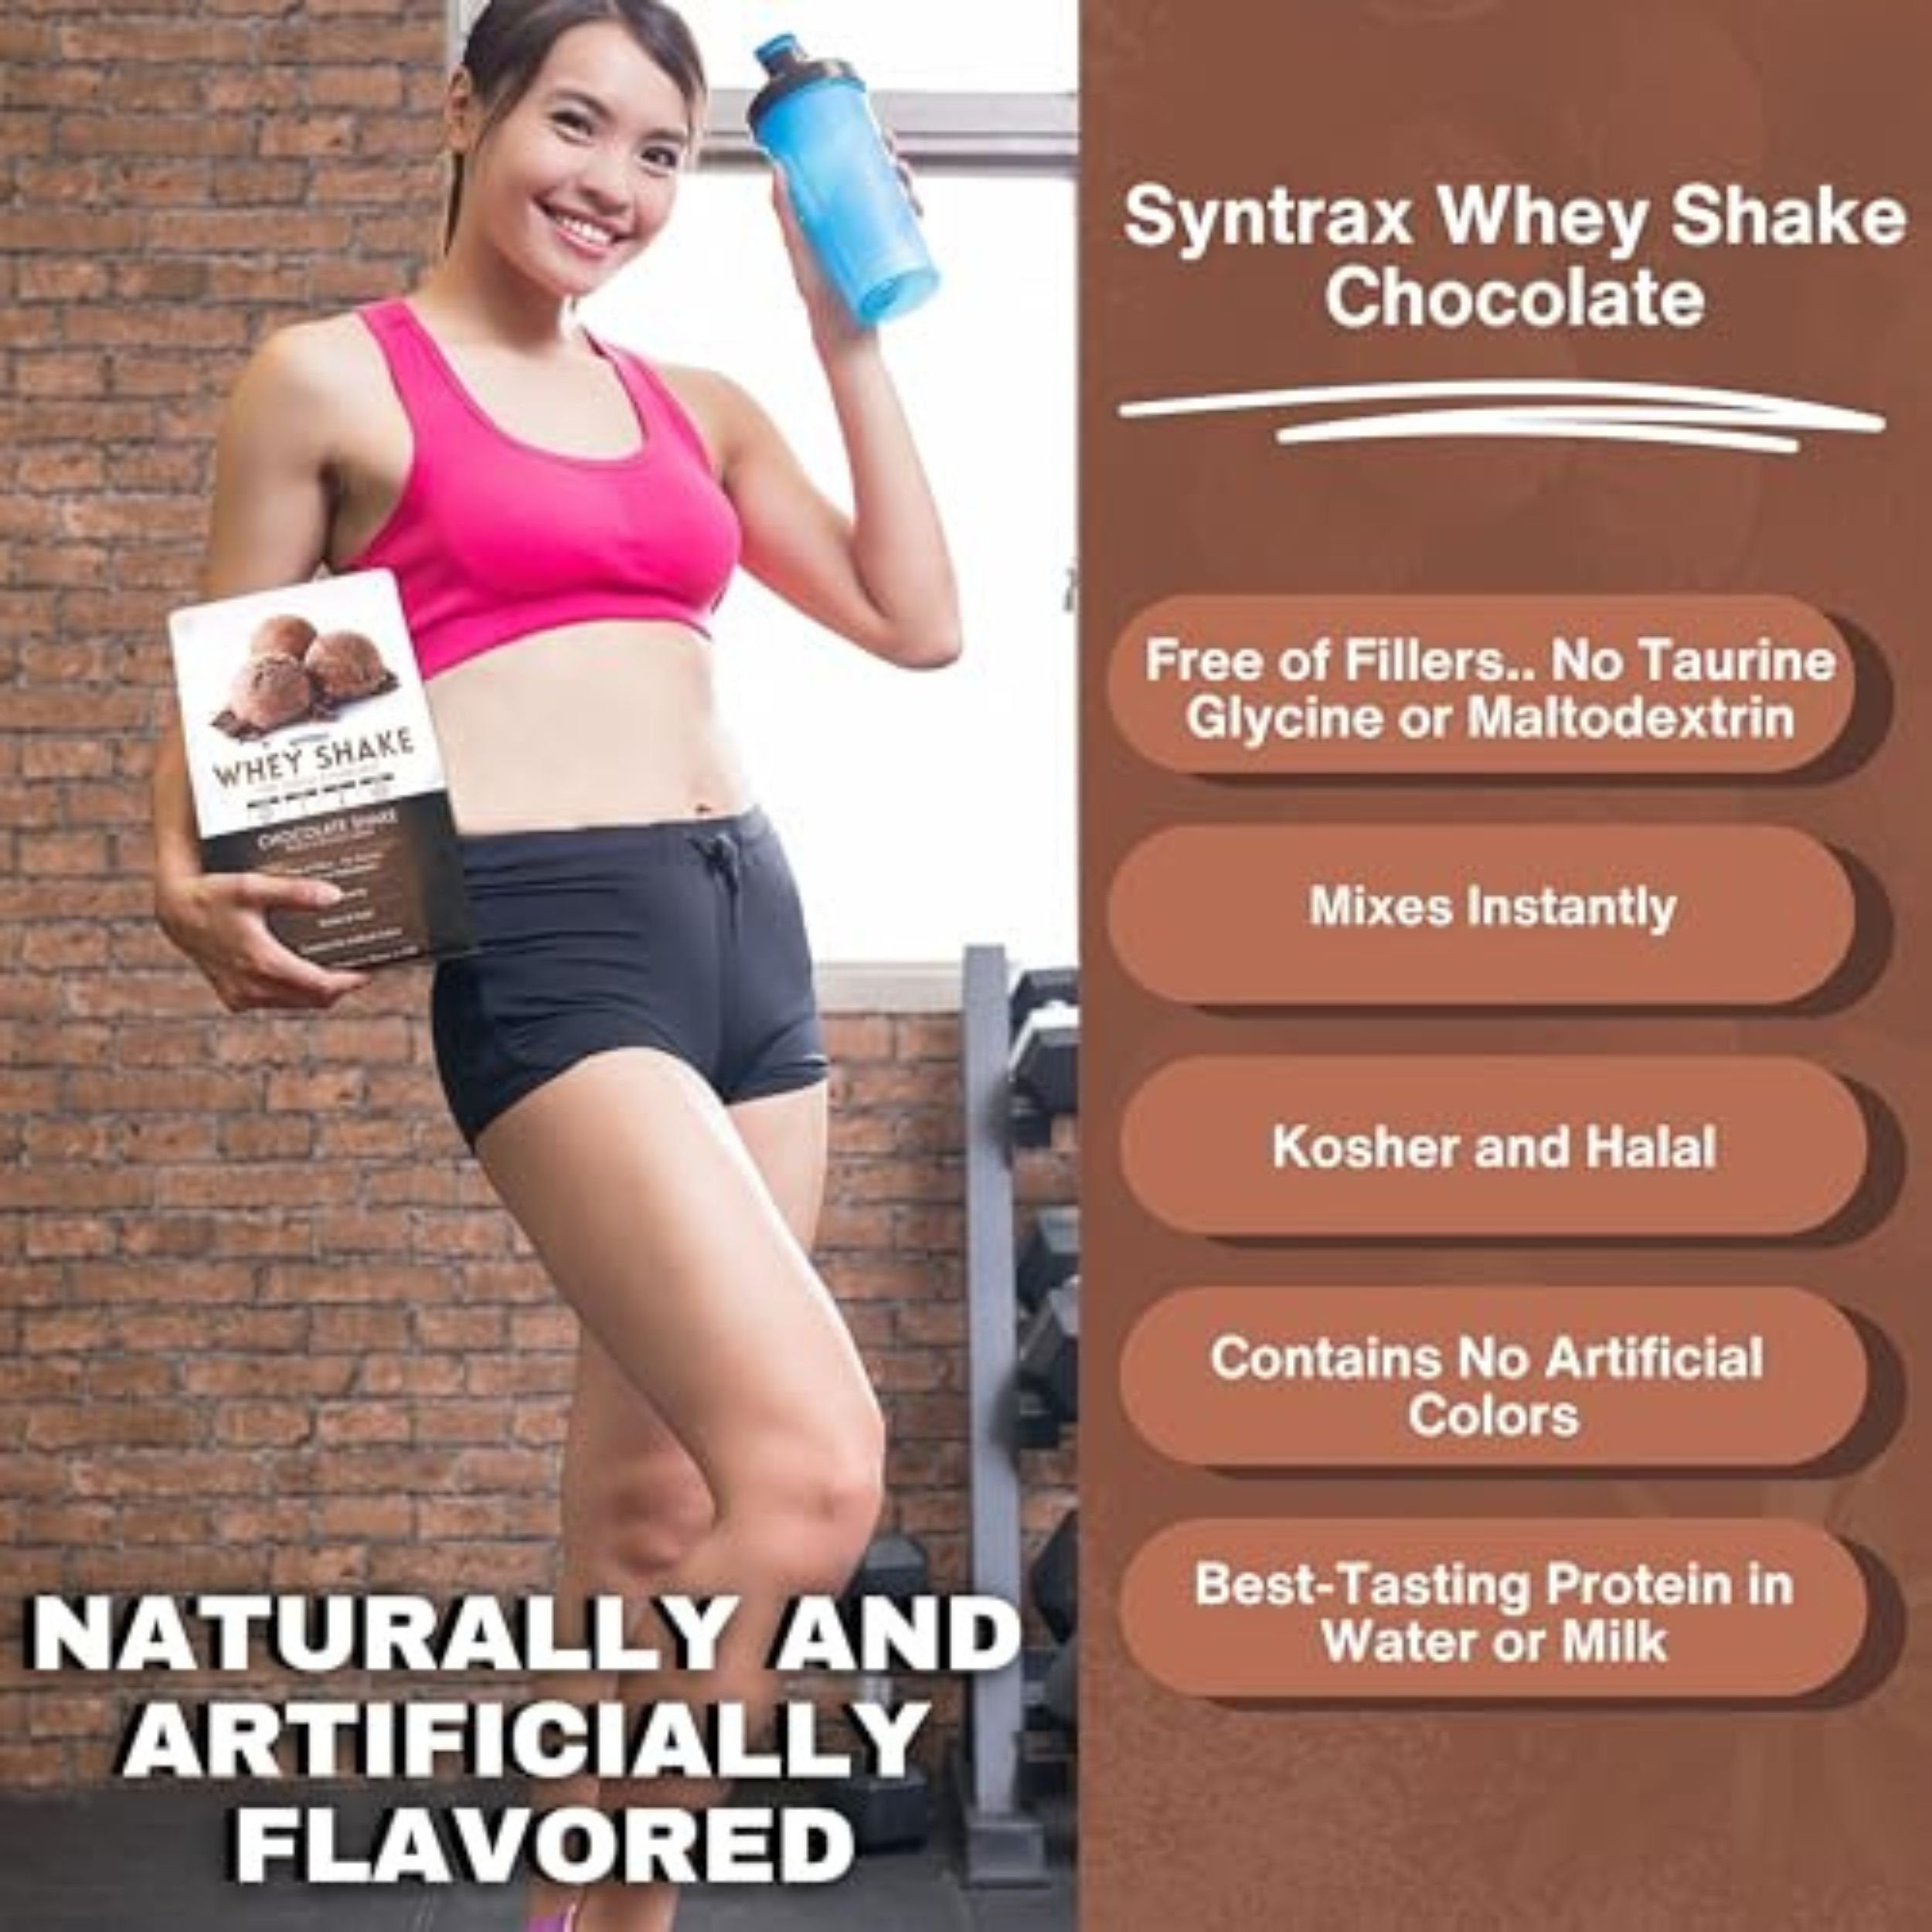 Syntrax Bundle, 2 Items Whey Shake, Native Grass-Fed Wholesome Denatured Whey Protein Concentrate with Glutamine Peptides, Chocolate Shake, 5 Pounds (SW5CS) with Worldwide Nutrition Keychain